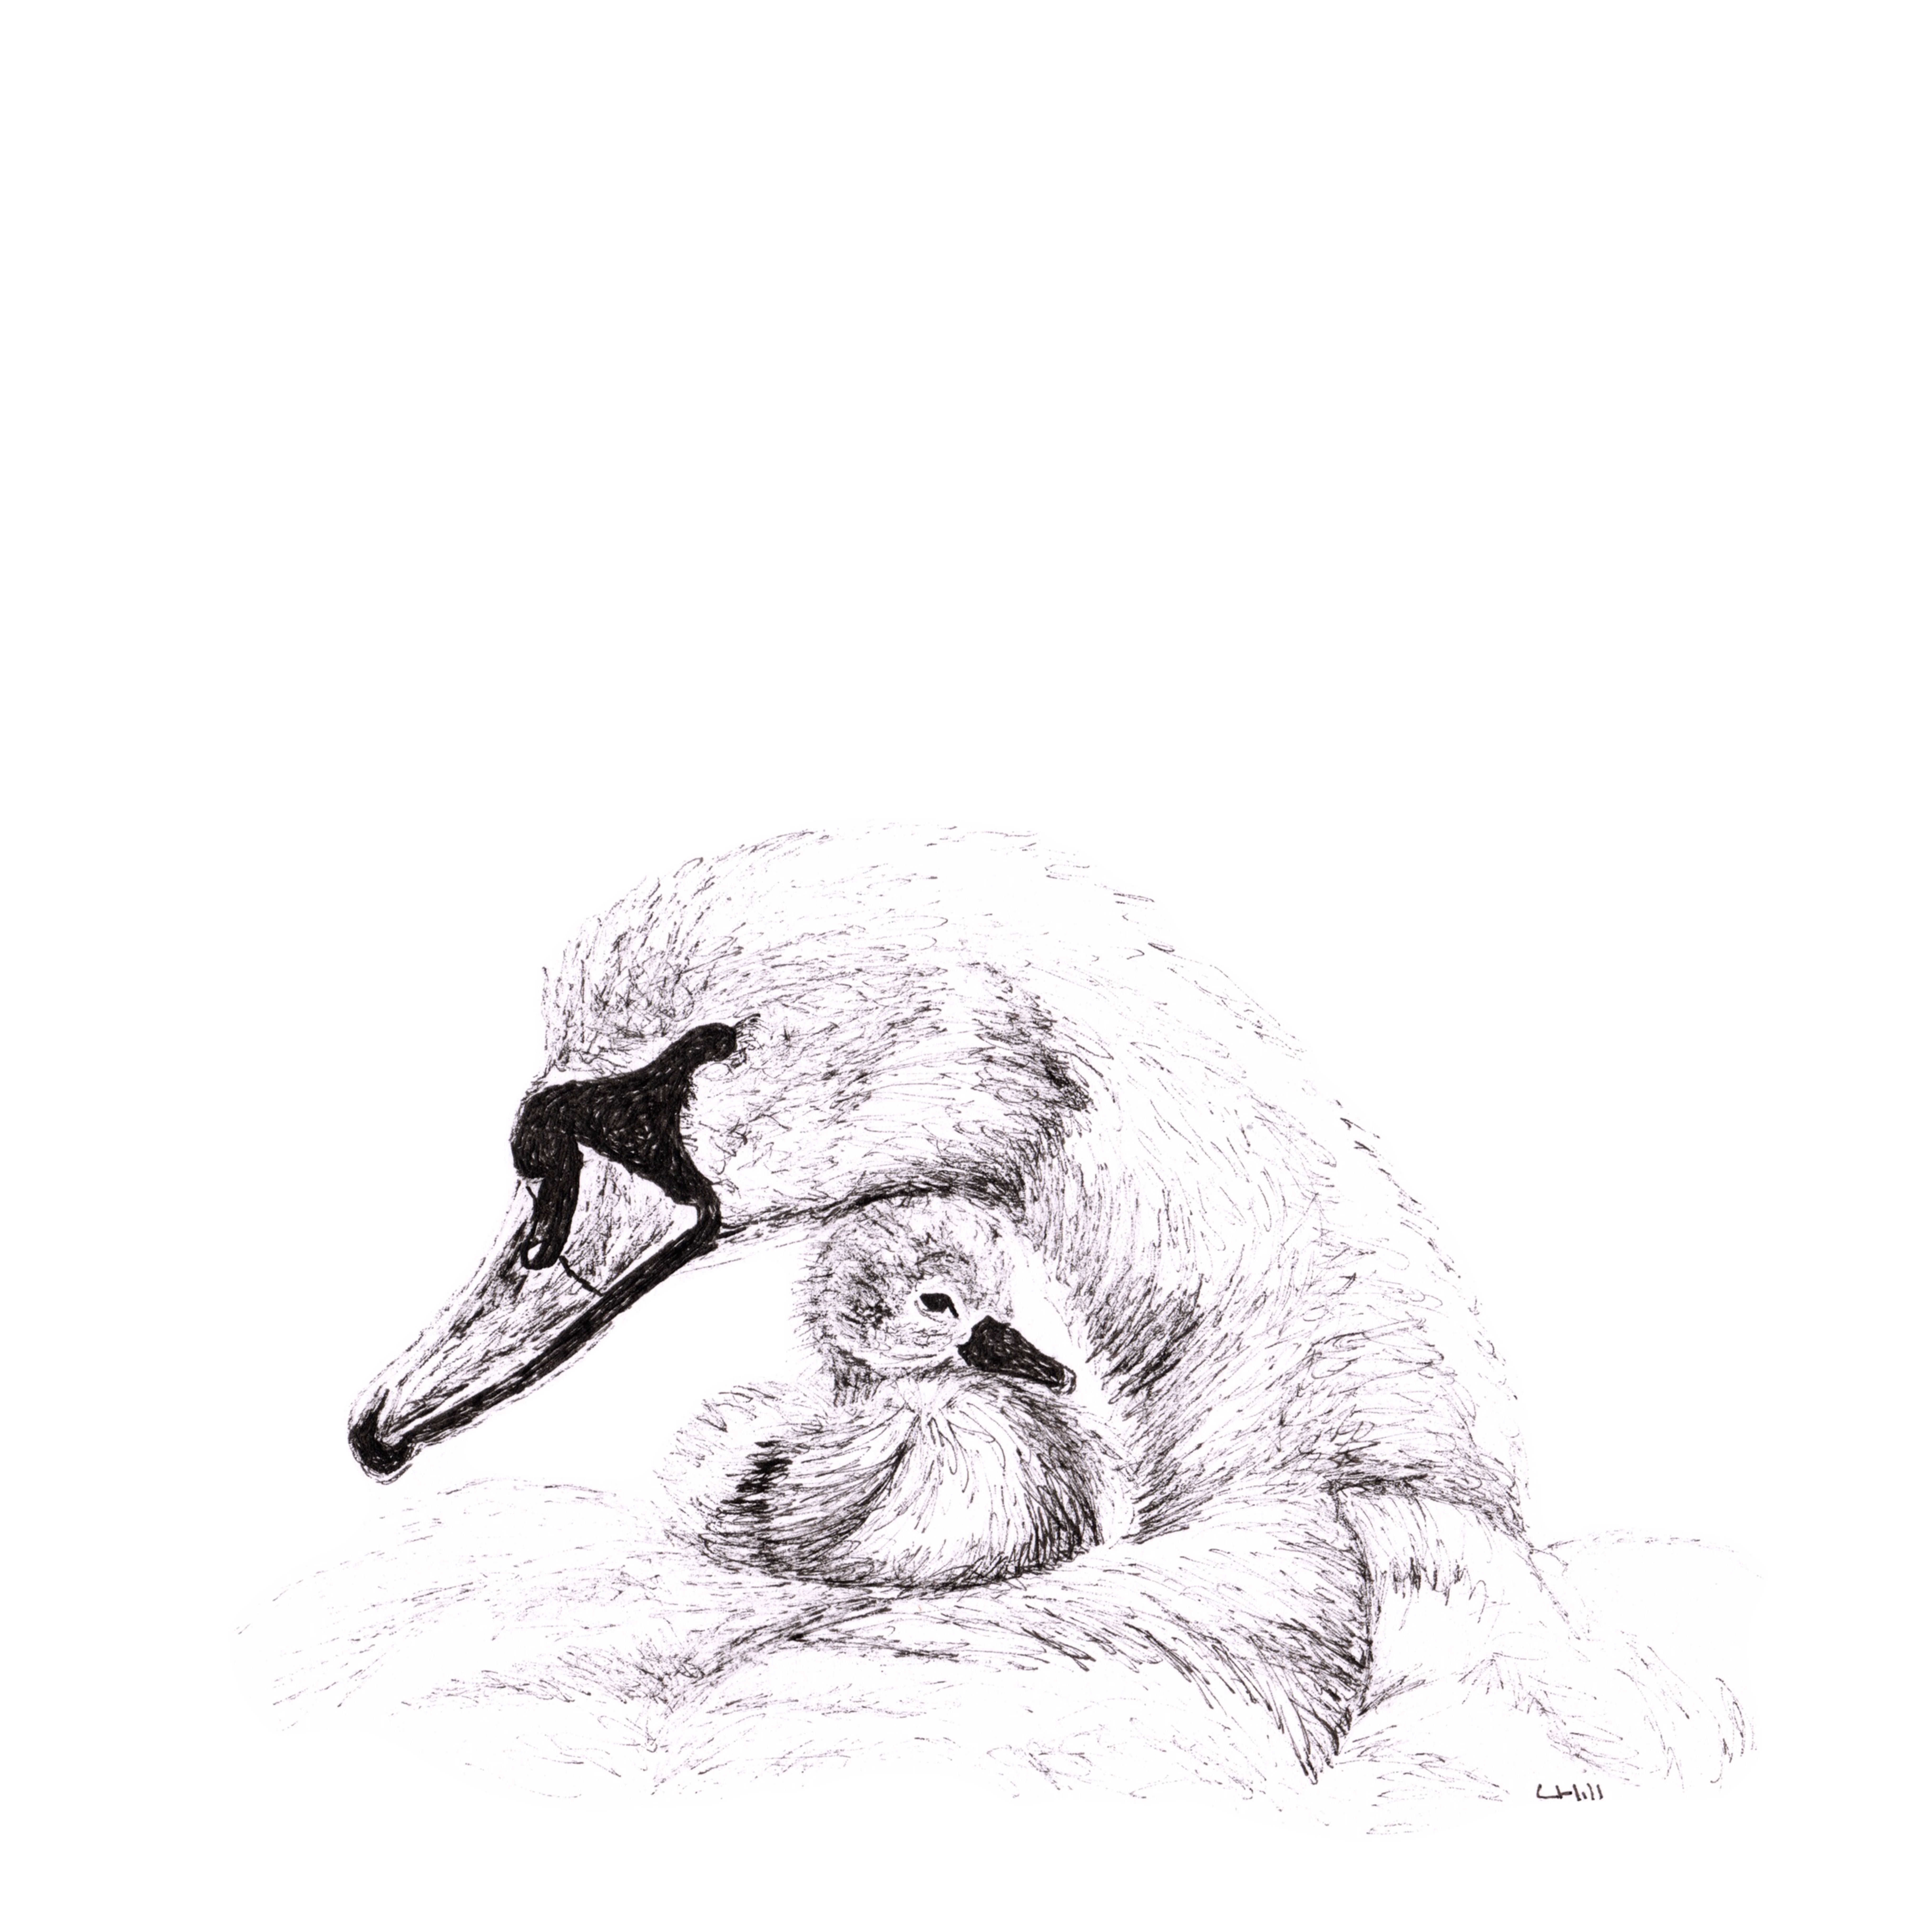 Swan and Cygnet pen and ink illustration by Louisa Hill